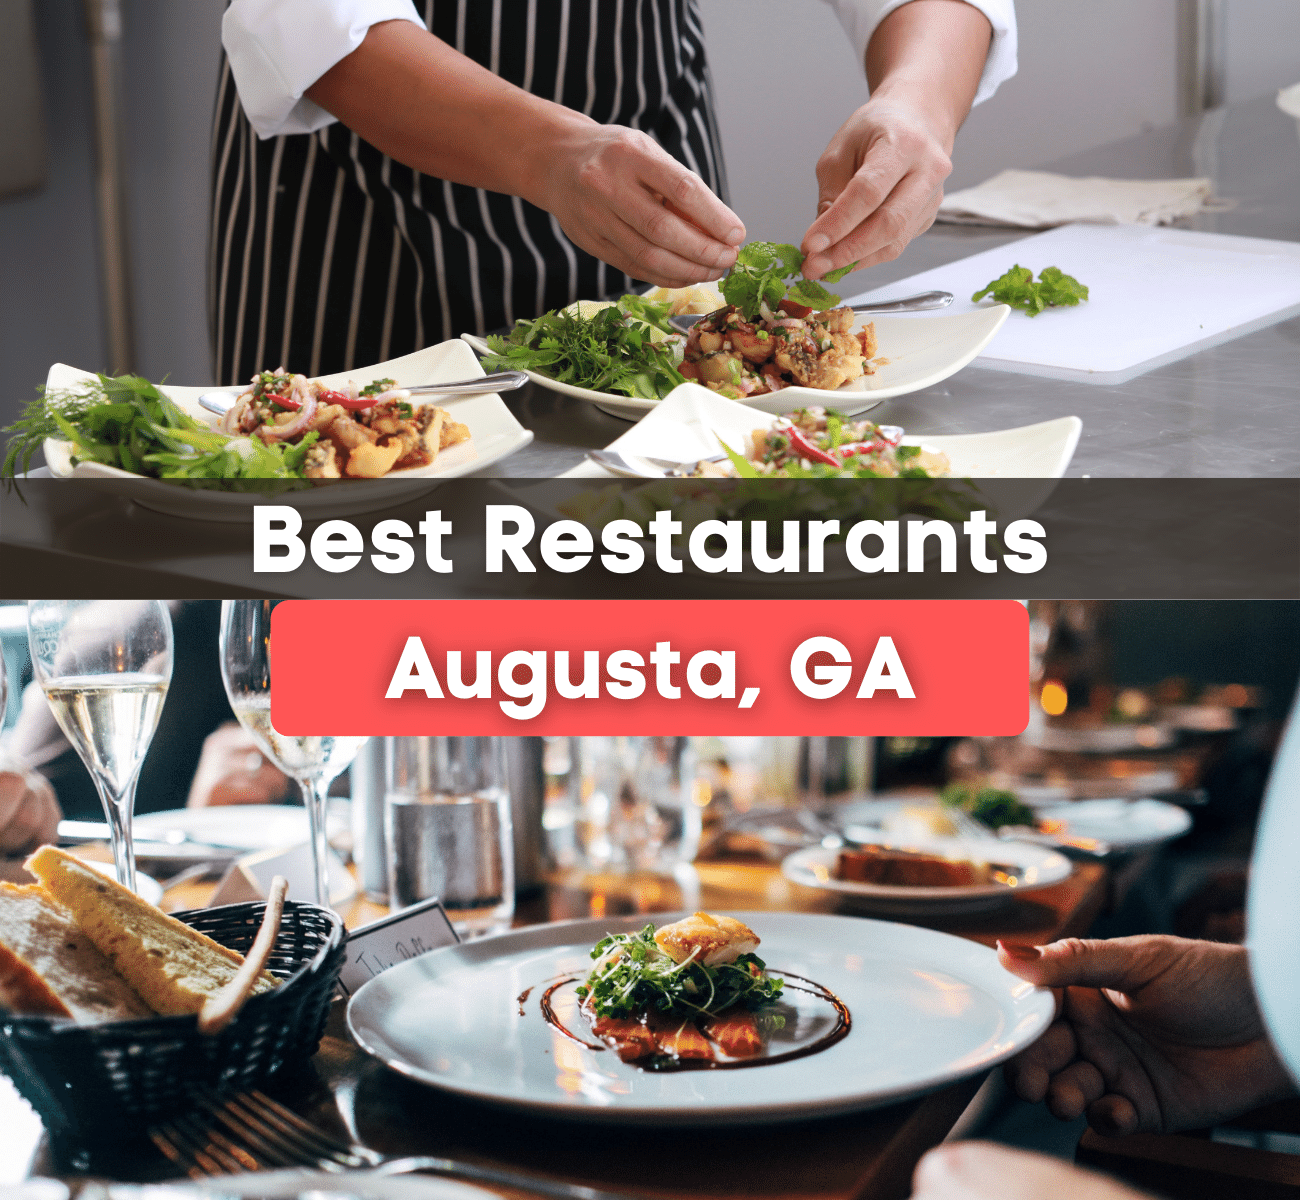 chef making dishes and eating at a restaurant - Best Restaurants in Augusta, GA